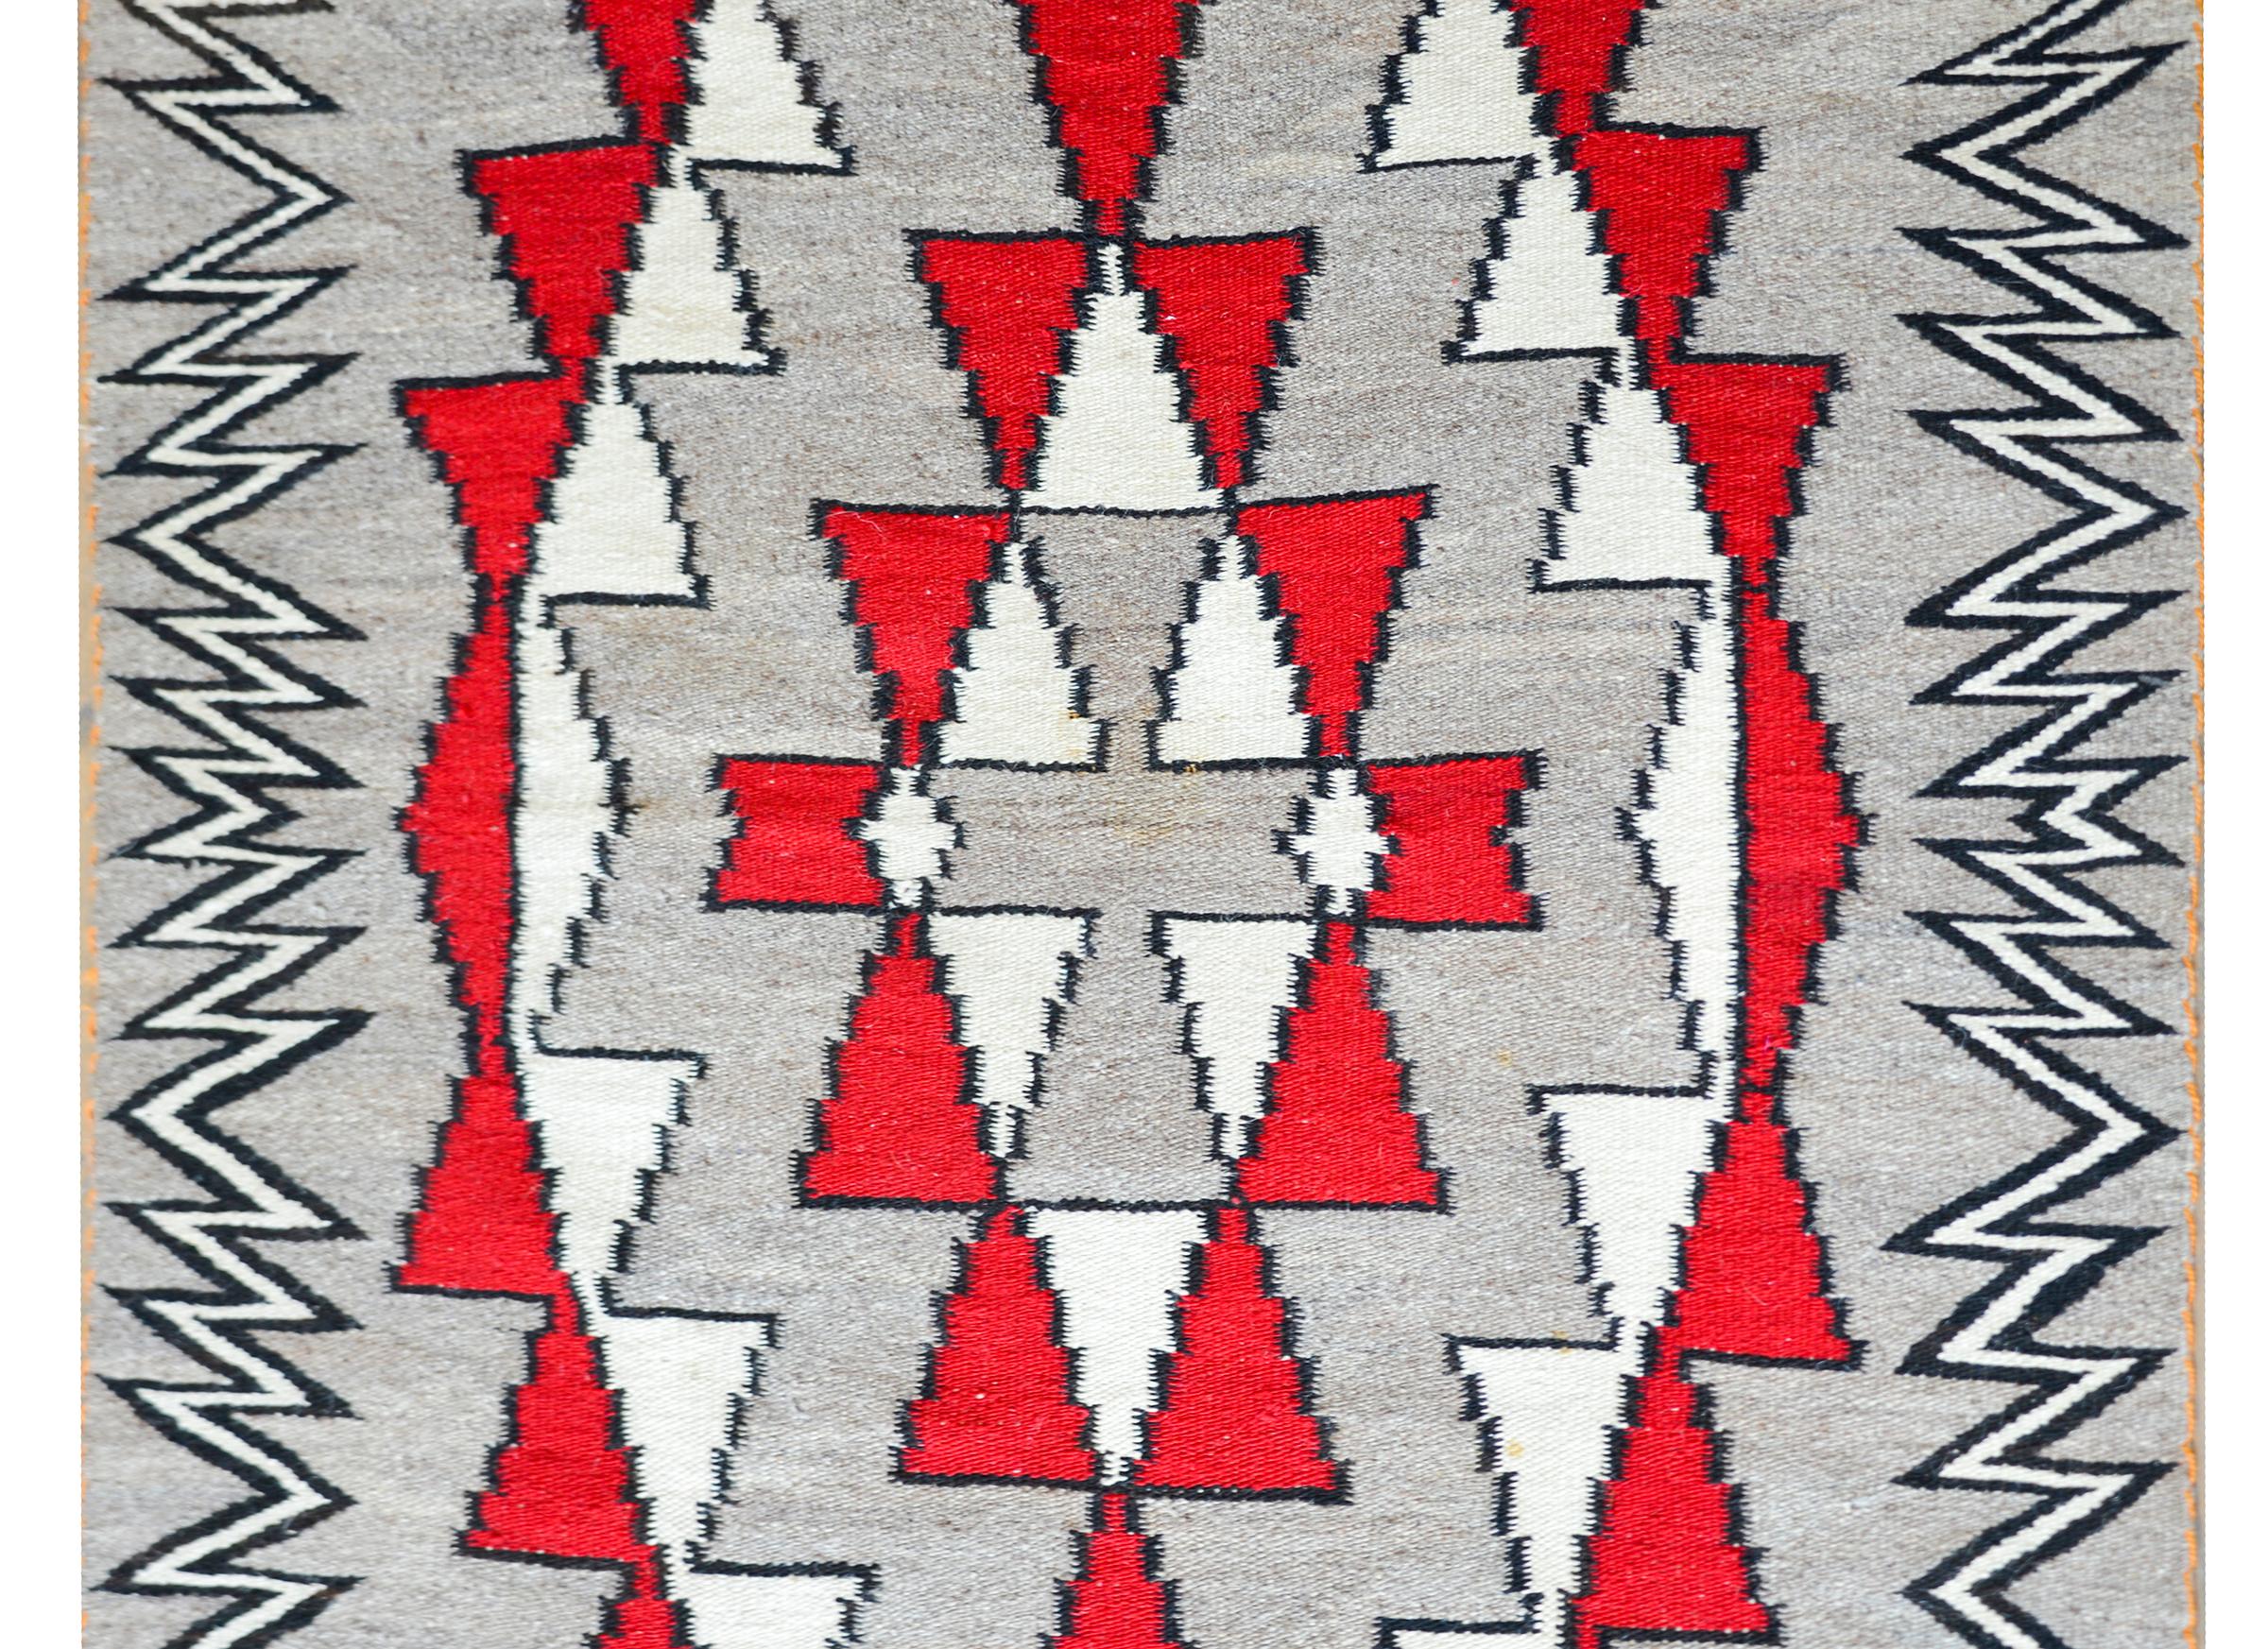 A striking early 20th century Native North American Navajo Rug with a bold geometric diamond pattern woven in crimson and white wool against a gray background, and with a fantastic black and white zigzag patterned border.